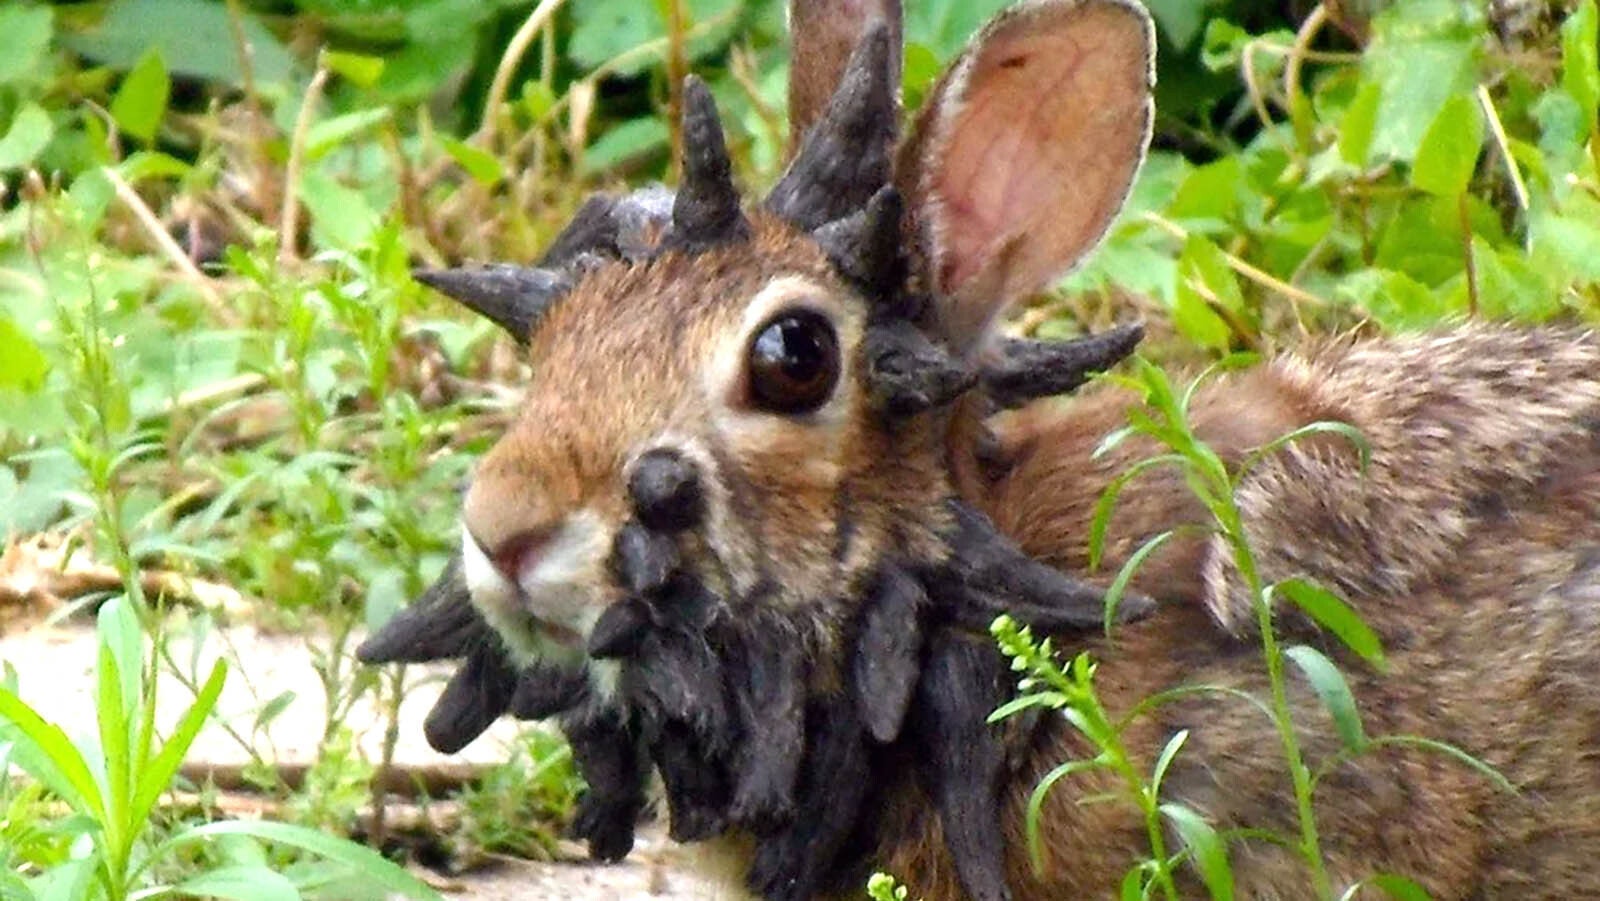 The legend of the jackalope might have started with pioneers in the 1800s seeing rabbits infected with viruses that can cause horn-like growths.